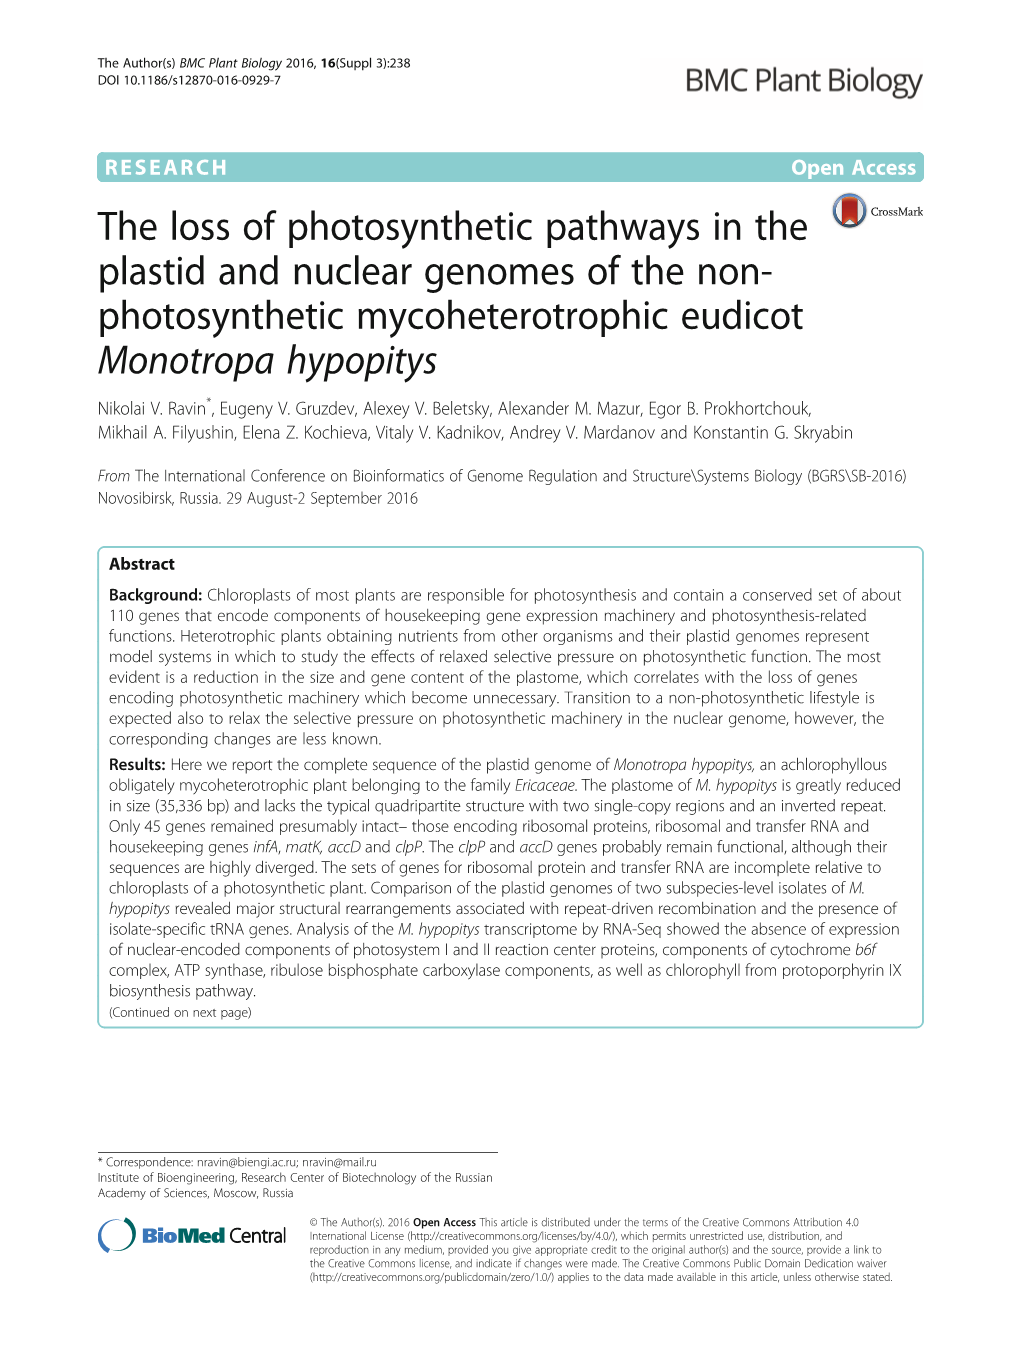 The Loss of Photosynthetic Pathways in the Plastid and Nuclear Genomes of the Non- Photosynthetic Mycoheterotrophic Eudicot Monotropa Hypopitys Nikolai V